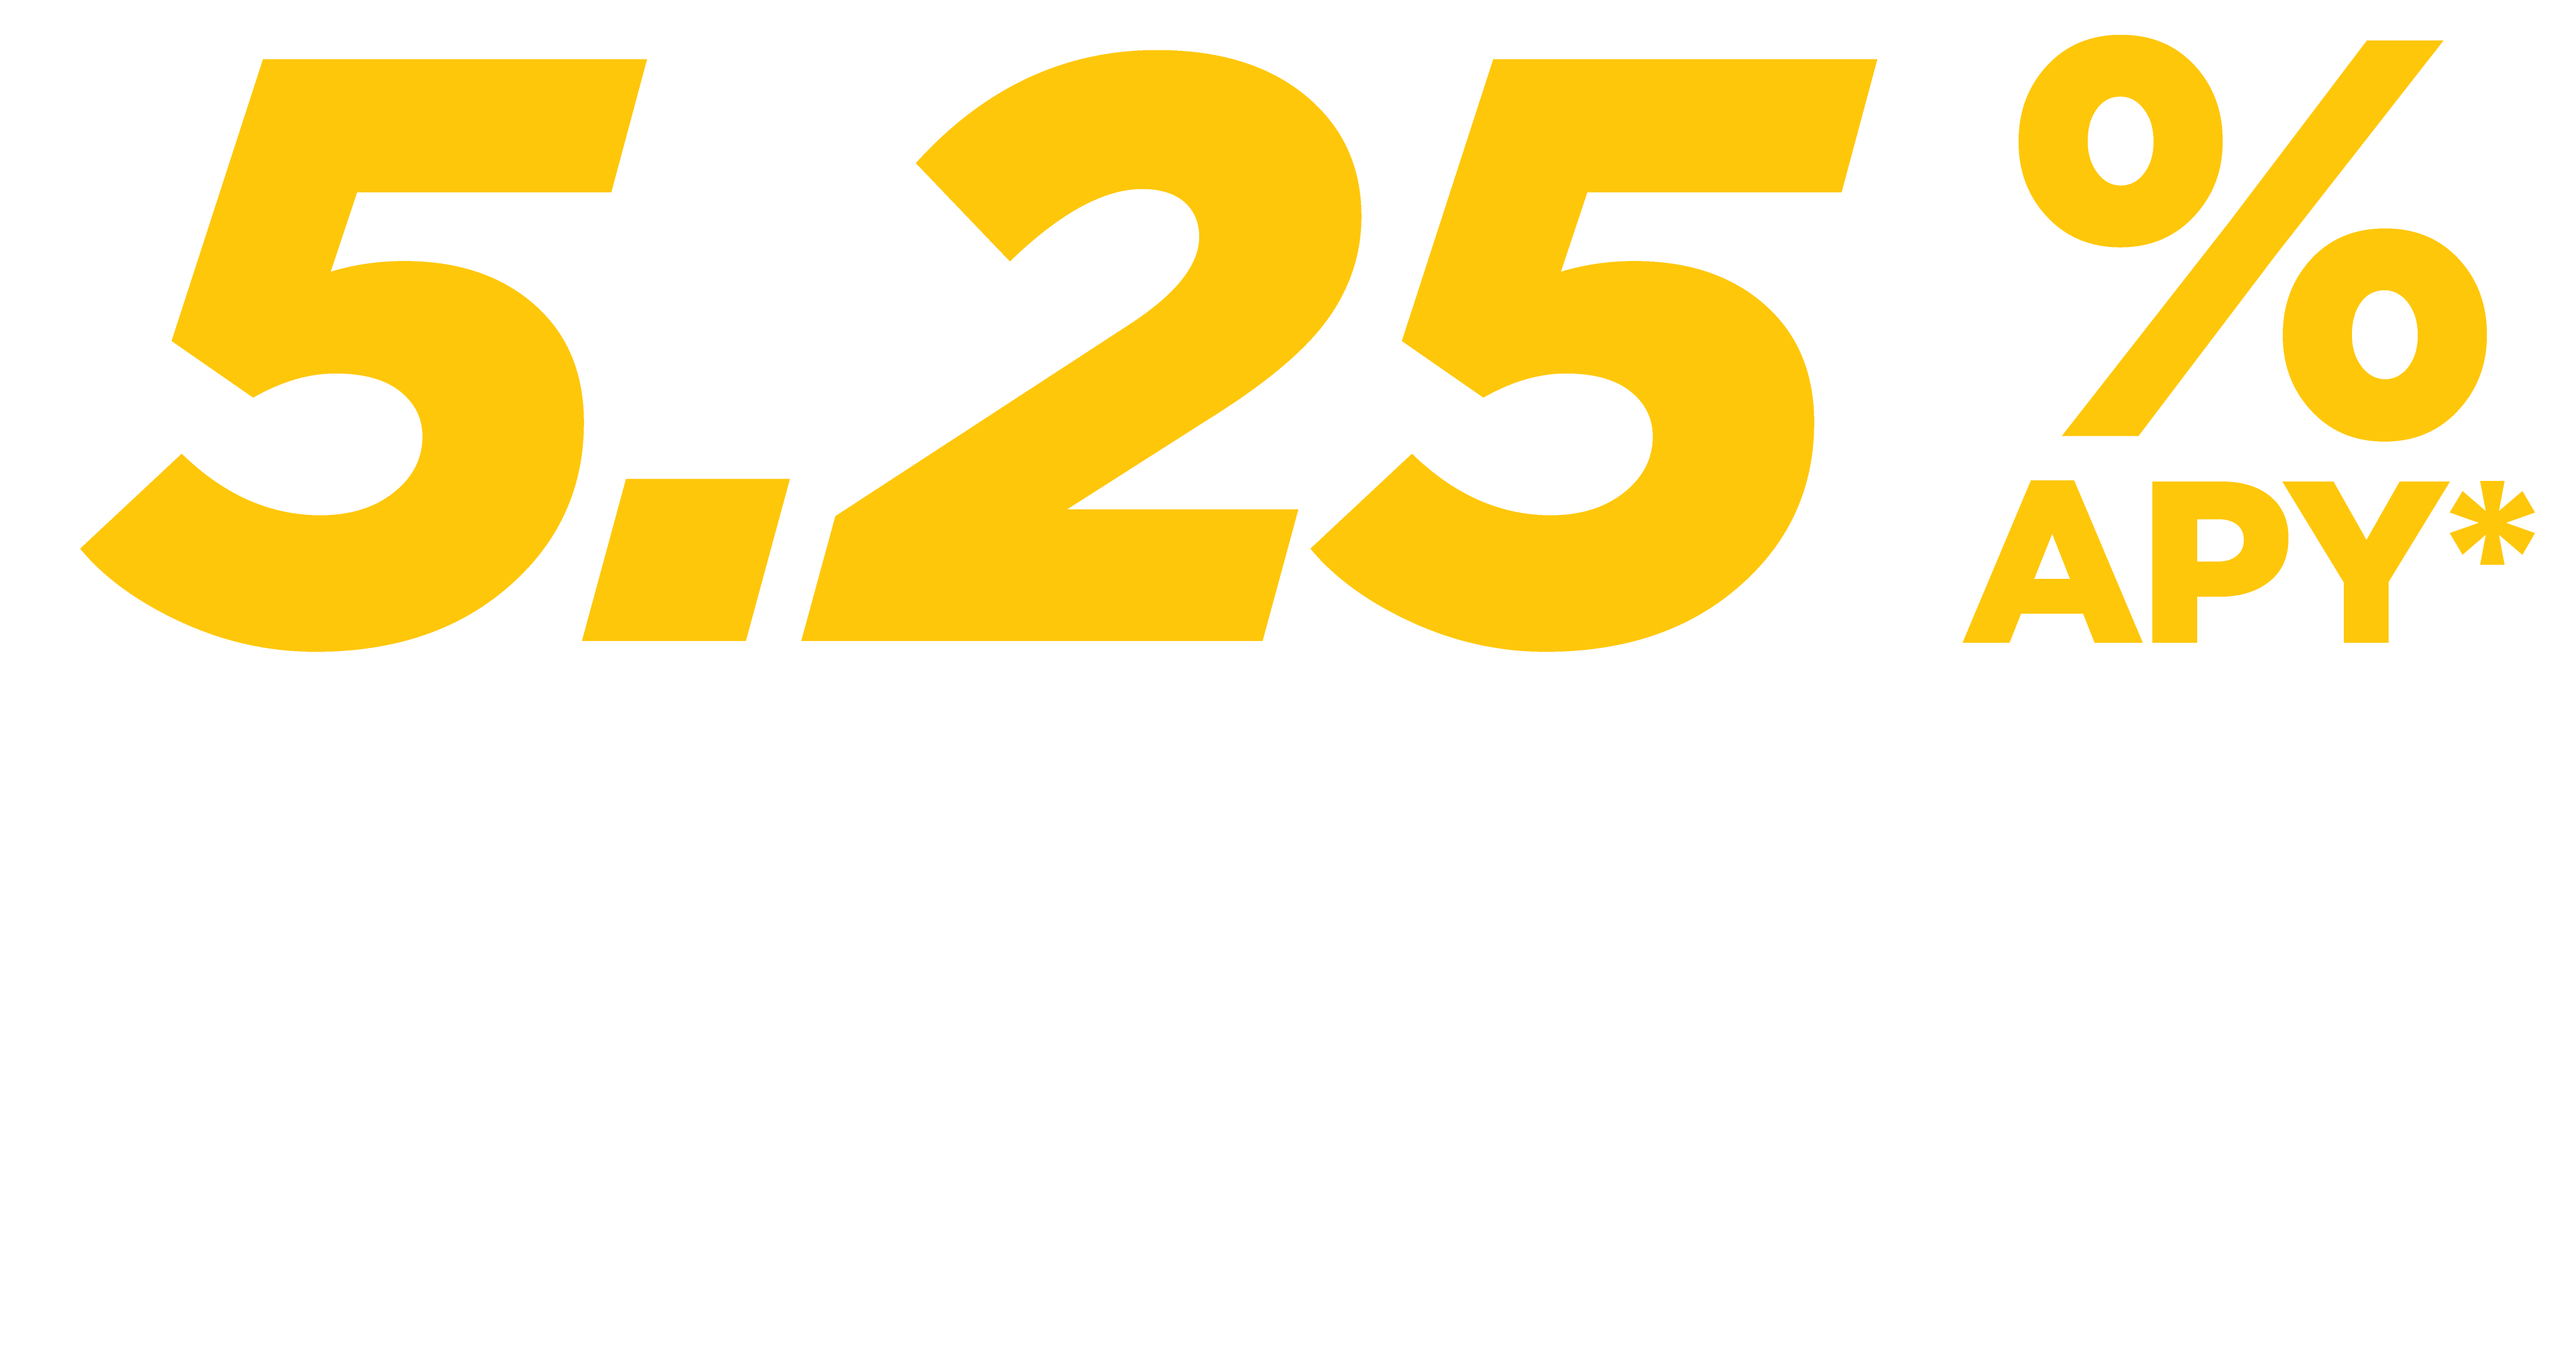 5.25% APY* 12-Month High-Yield Rate Bump CD